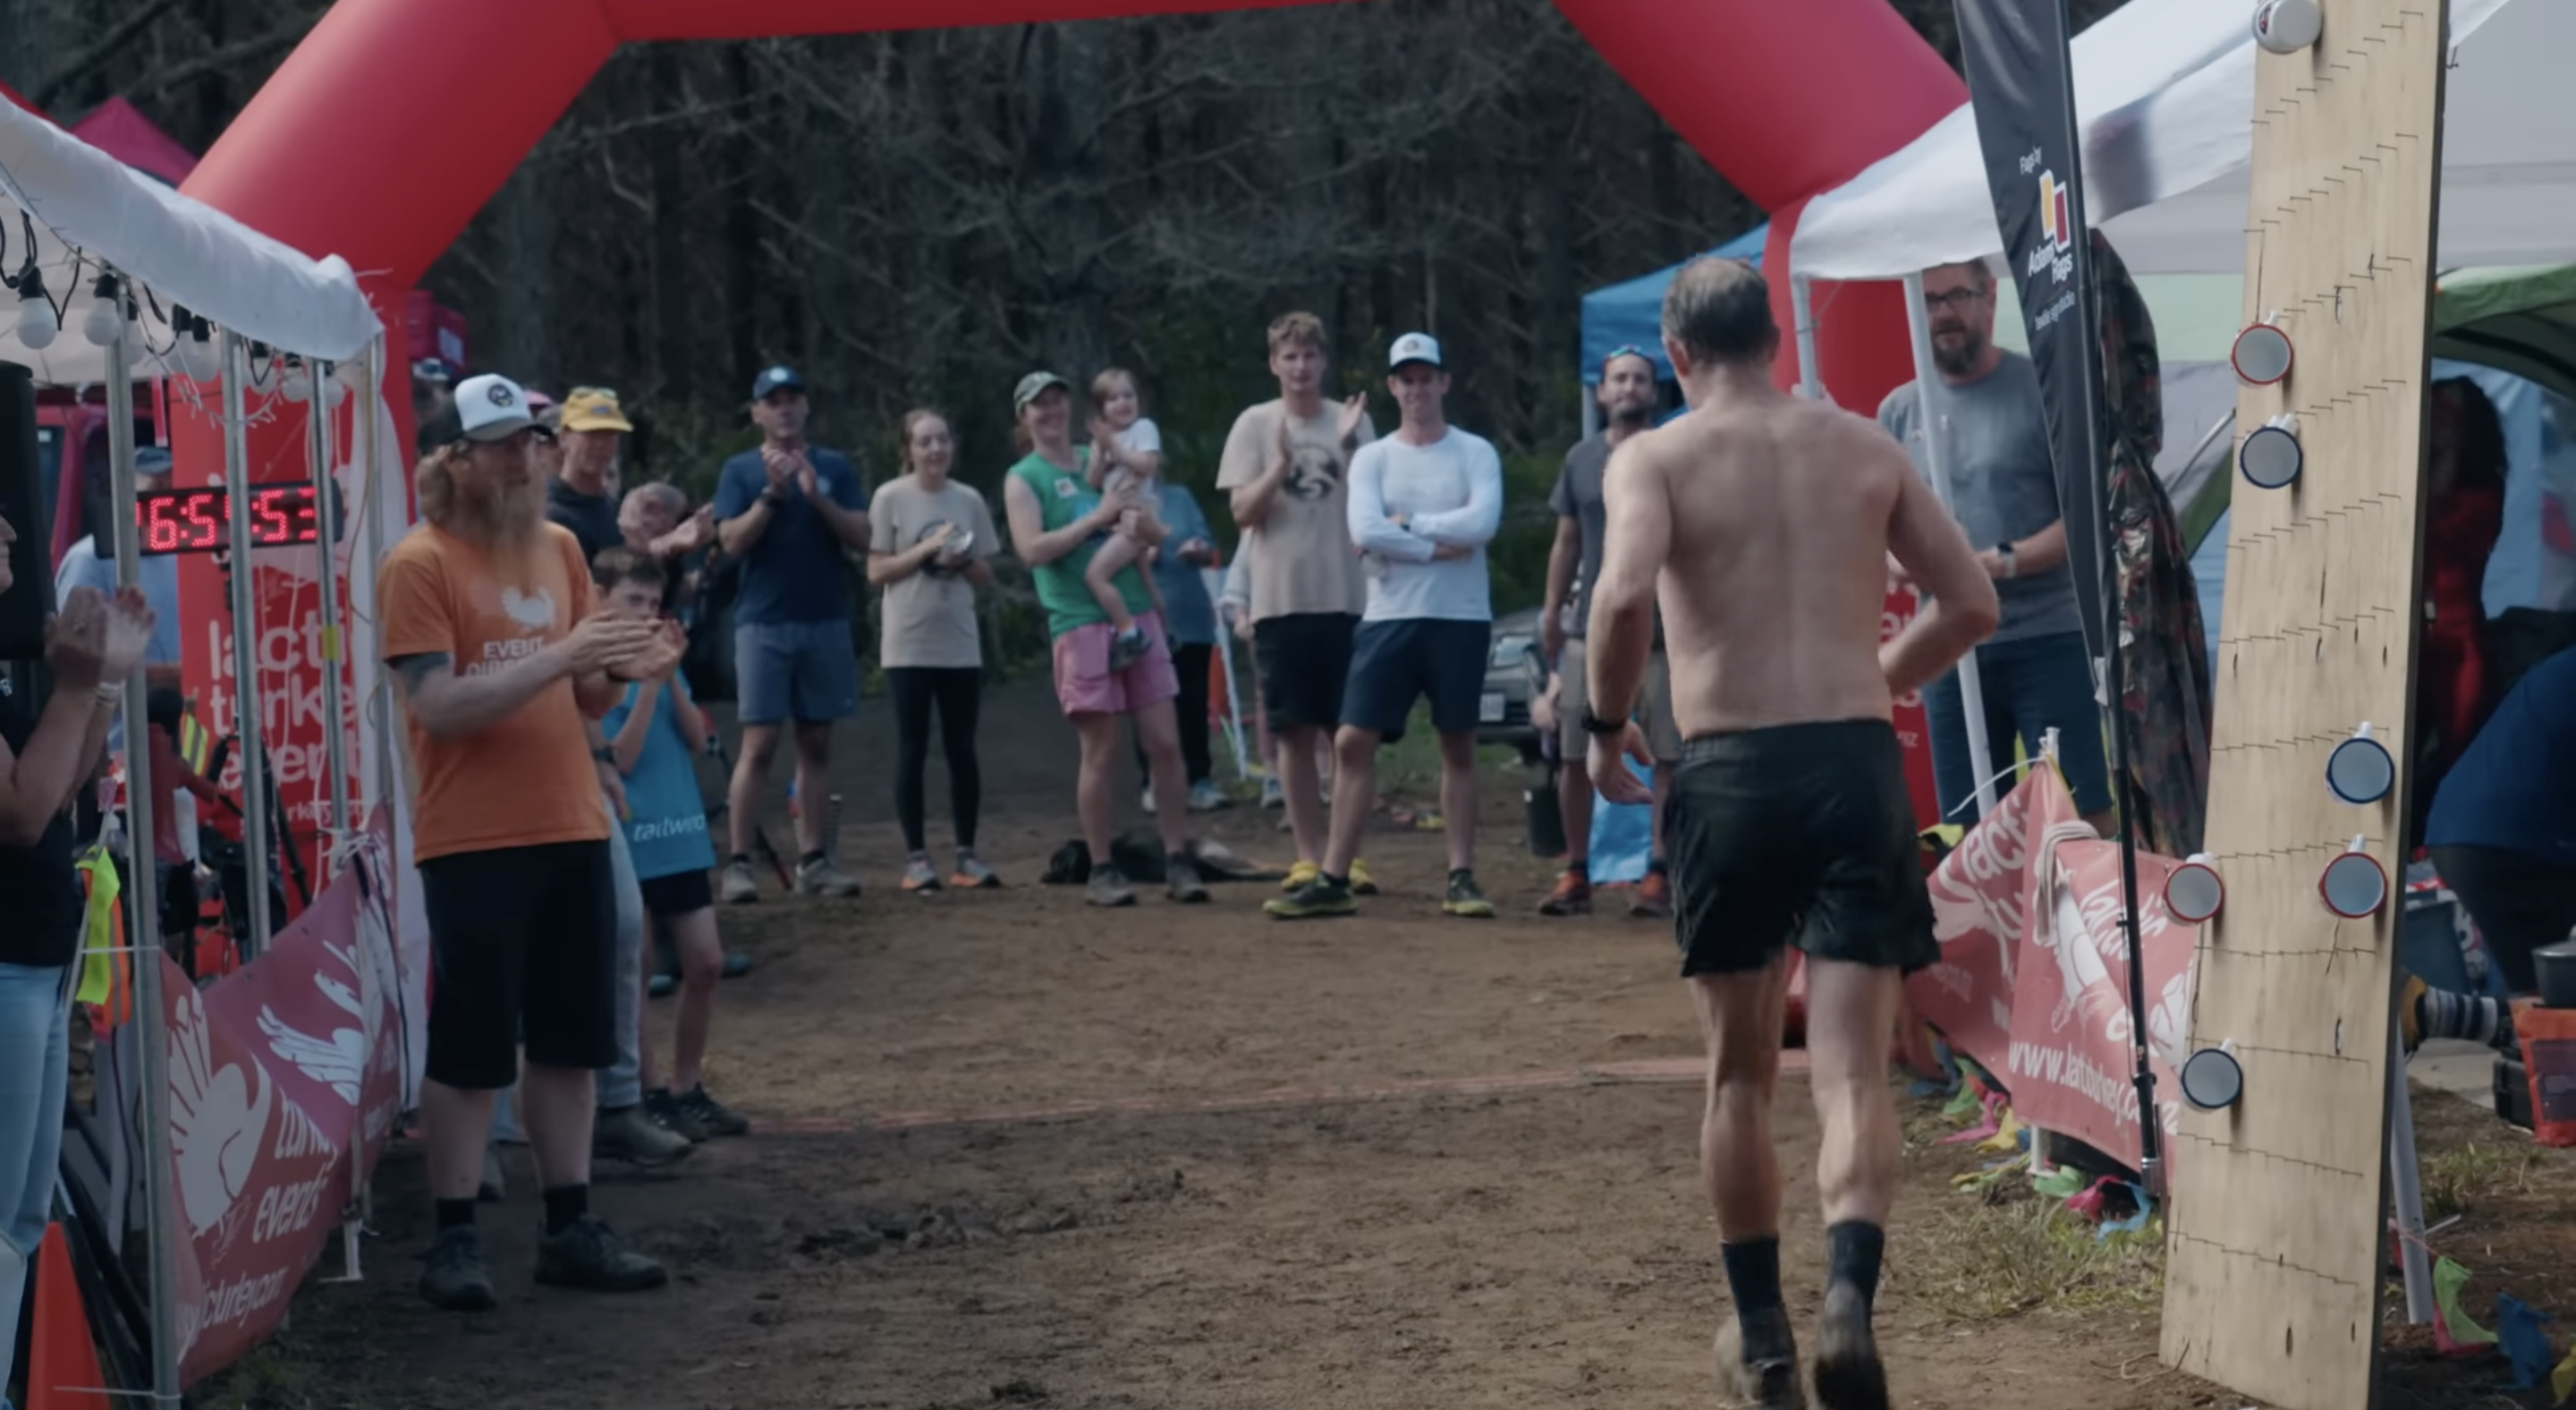 WATCH: Backyard Ultra Marathons Are Some Of The Craziest Races In The World